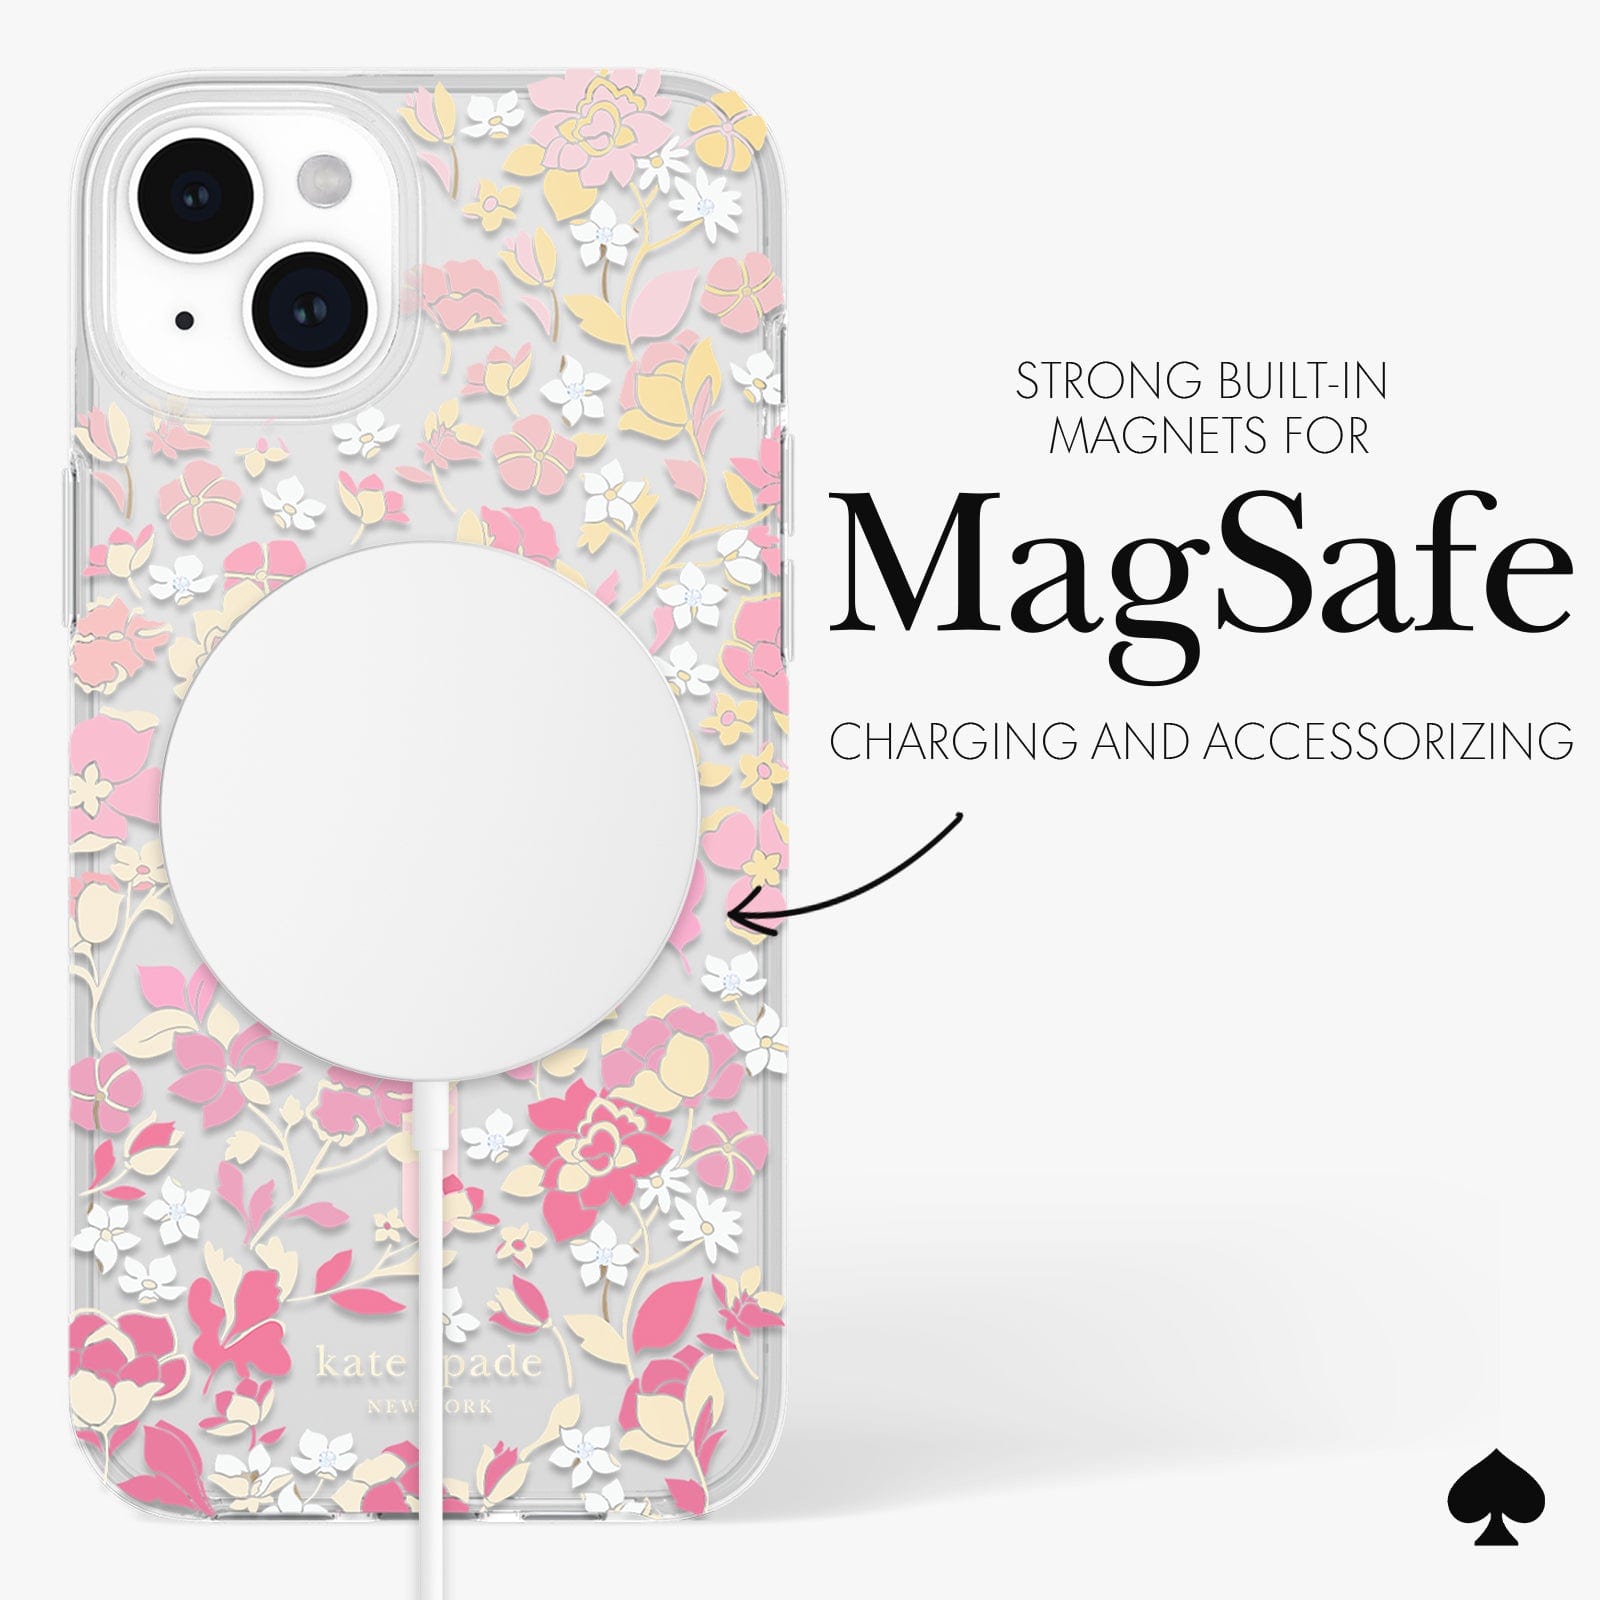 STRONG BUILT IN MAGNETS FOR MAGSAFE CHARGING AND ACCESSORIZING